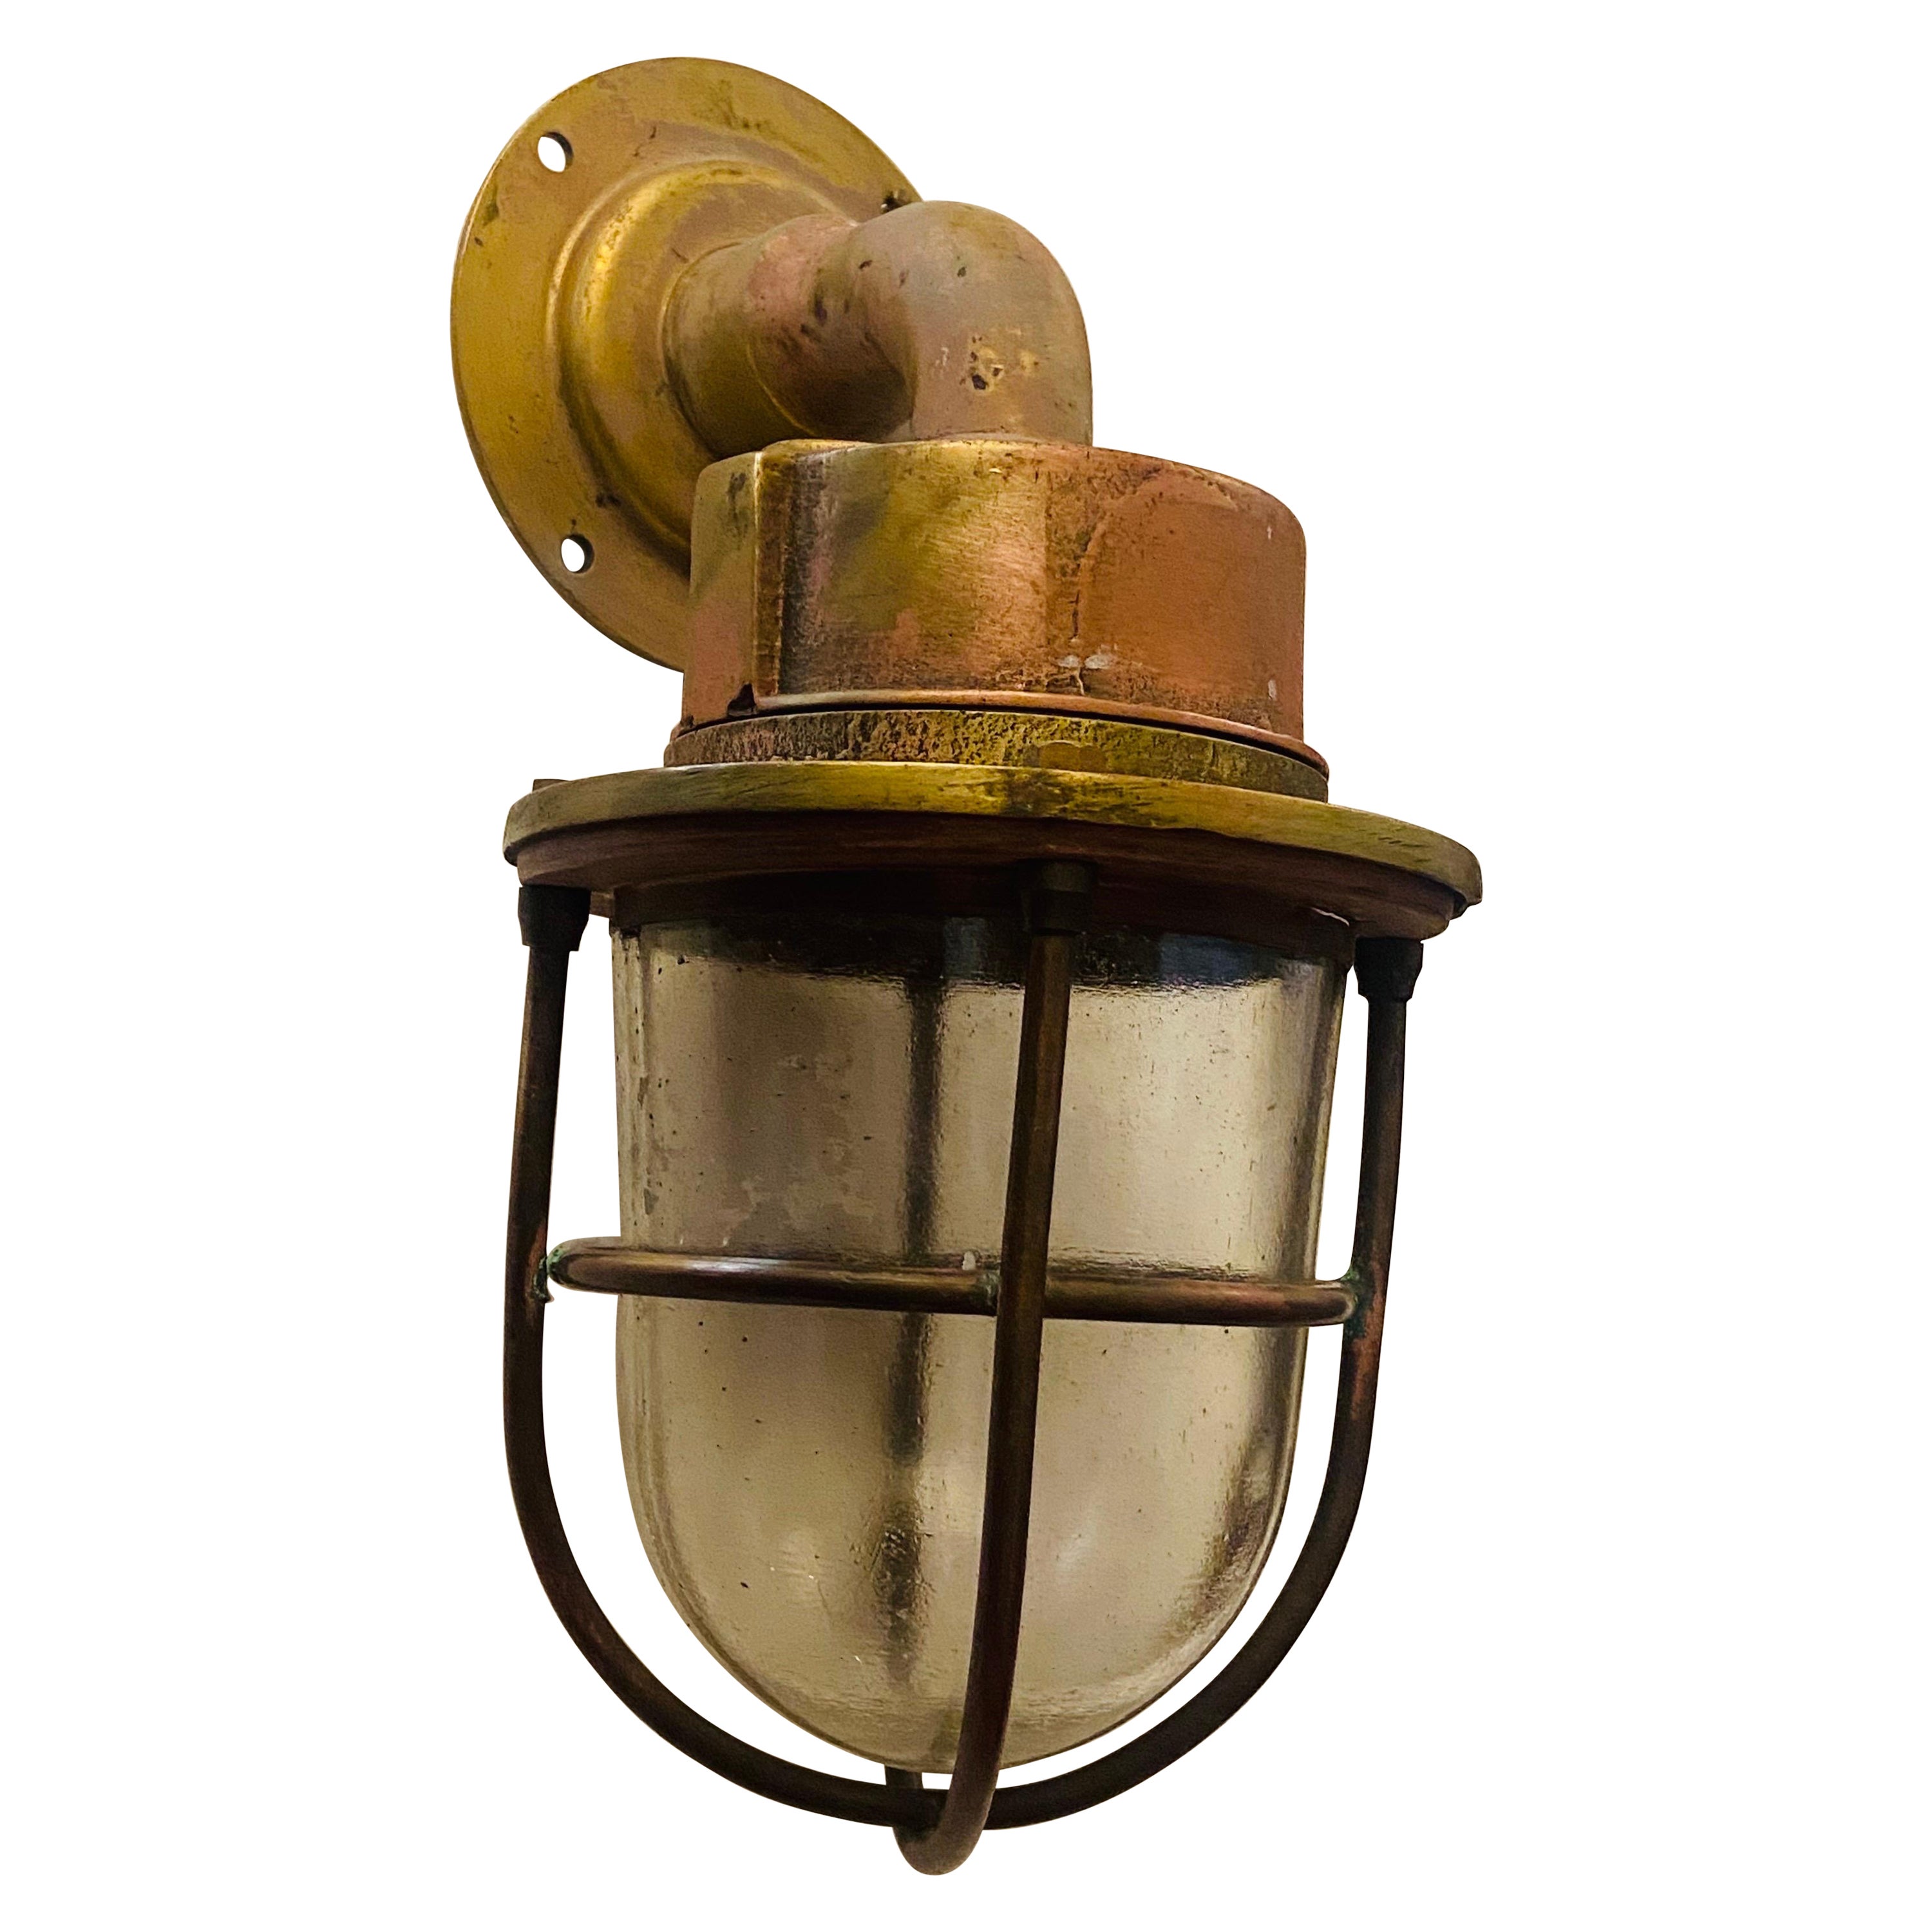 20th Century, French, Brass and Copper Marine Lamp with Metal Glass Shade